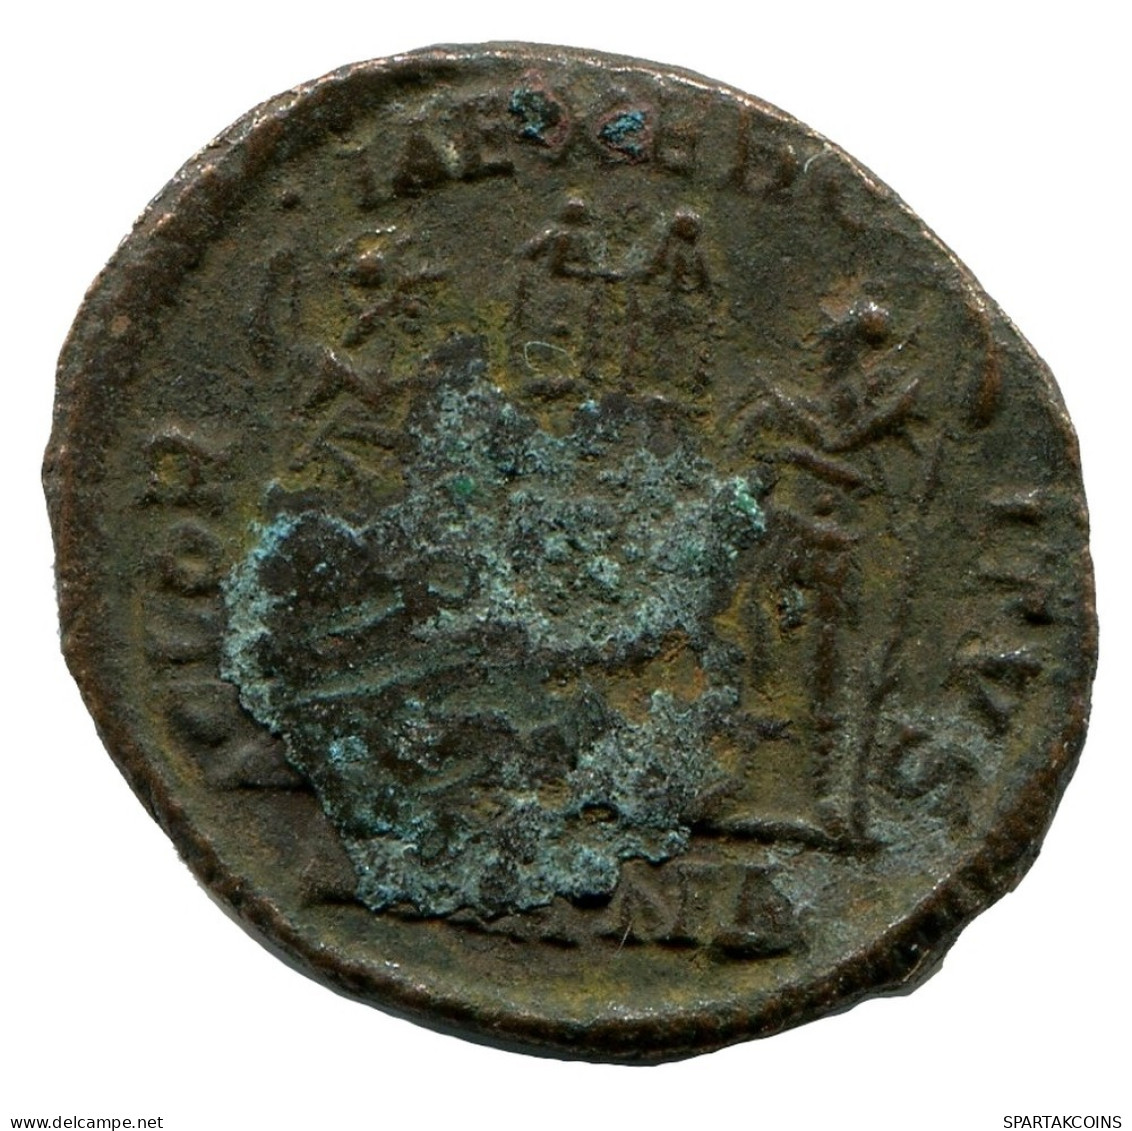 CONSTANTINE I MINTED IN ANTIOCH FOUND IN IHNASYAH HOARD EGYPT #ANC10588.14.U.A - The Christian Empire (307 AD Tot 363 AD)